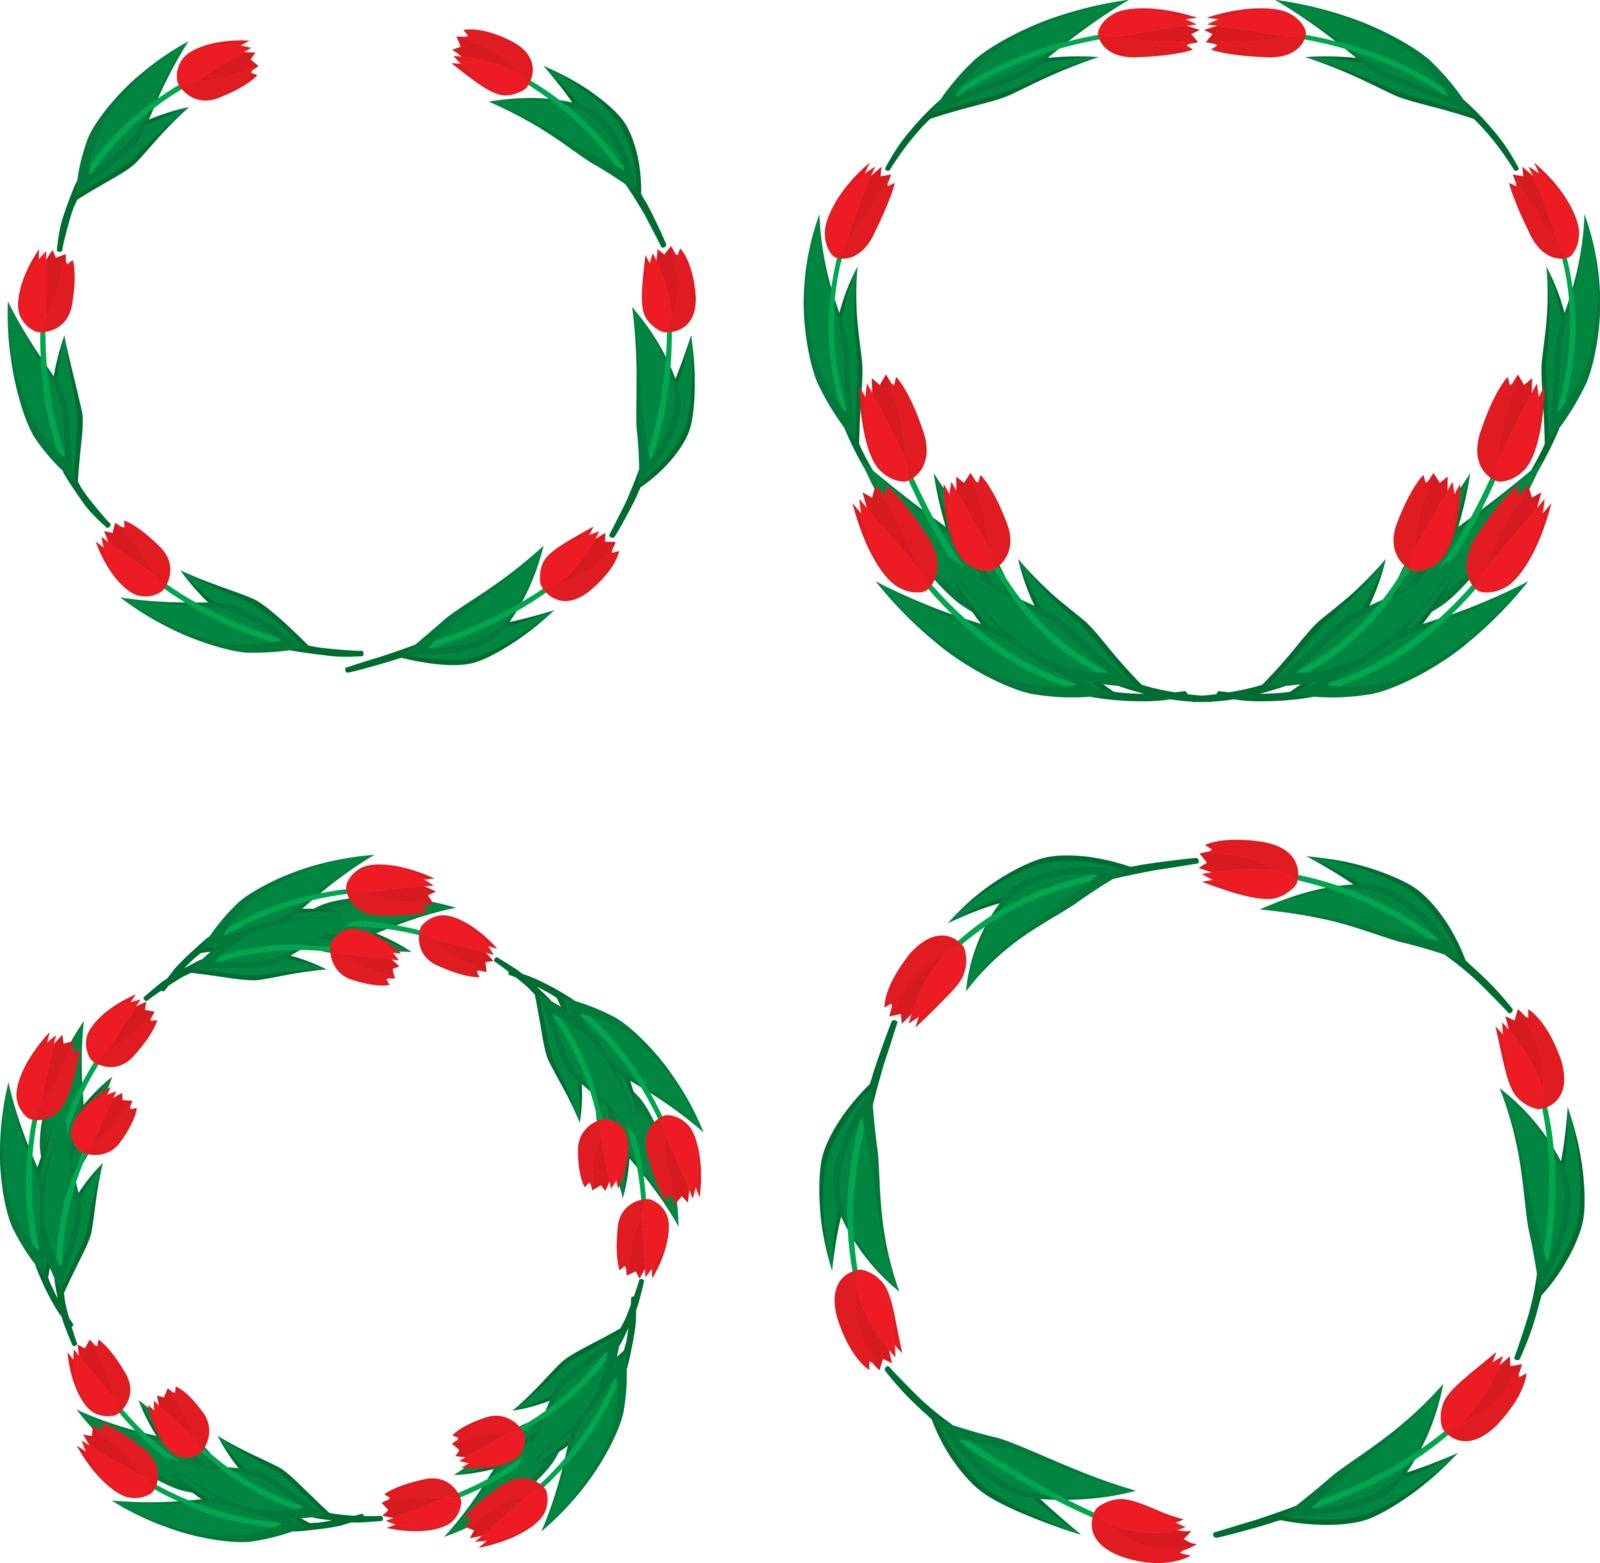 Illustration of four illustrated wreaths made of red tulips